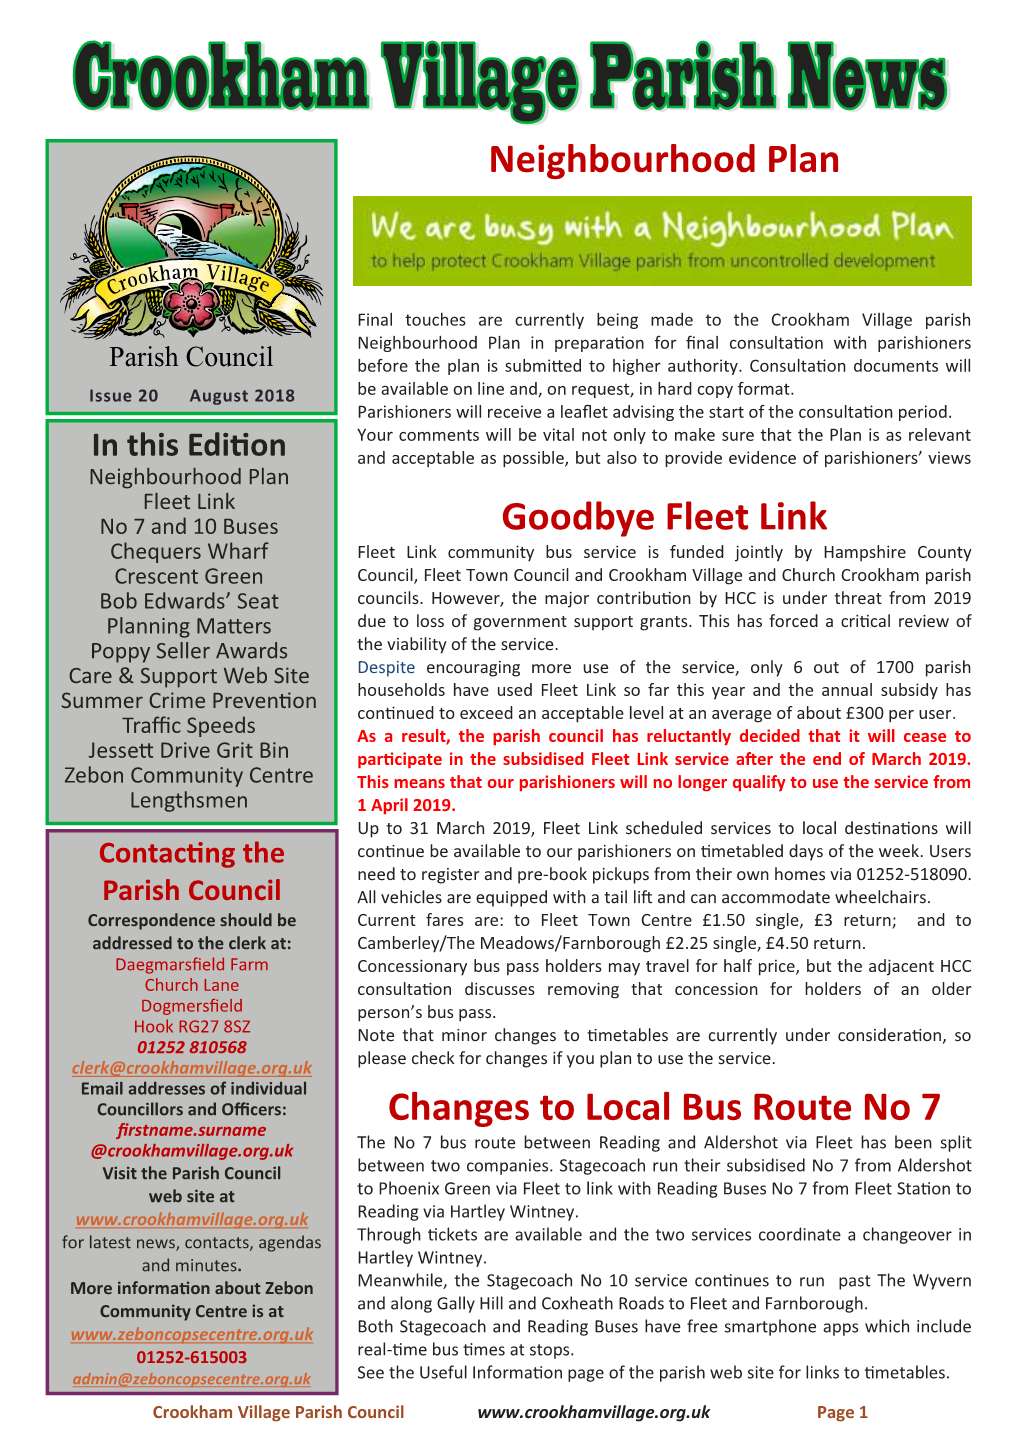 Neighbourhood Plan Changes to Local Bus Route No 7